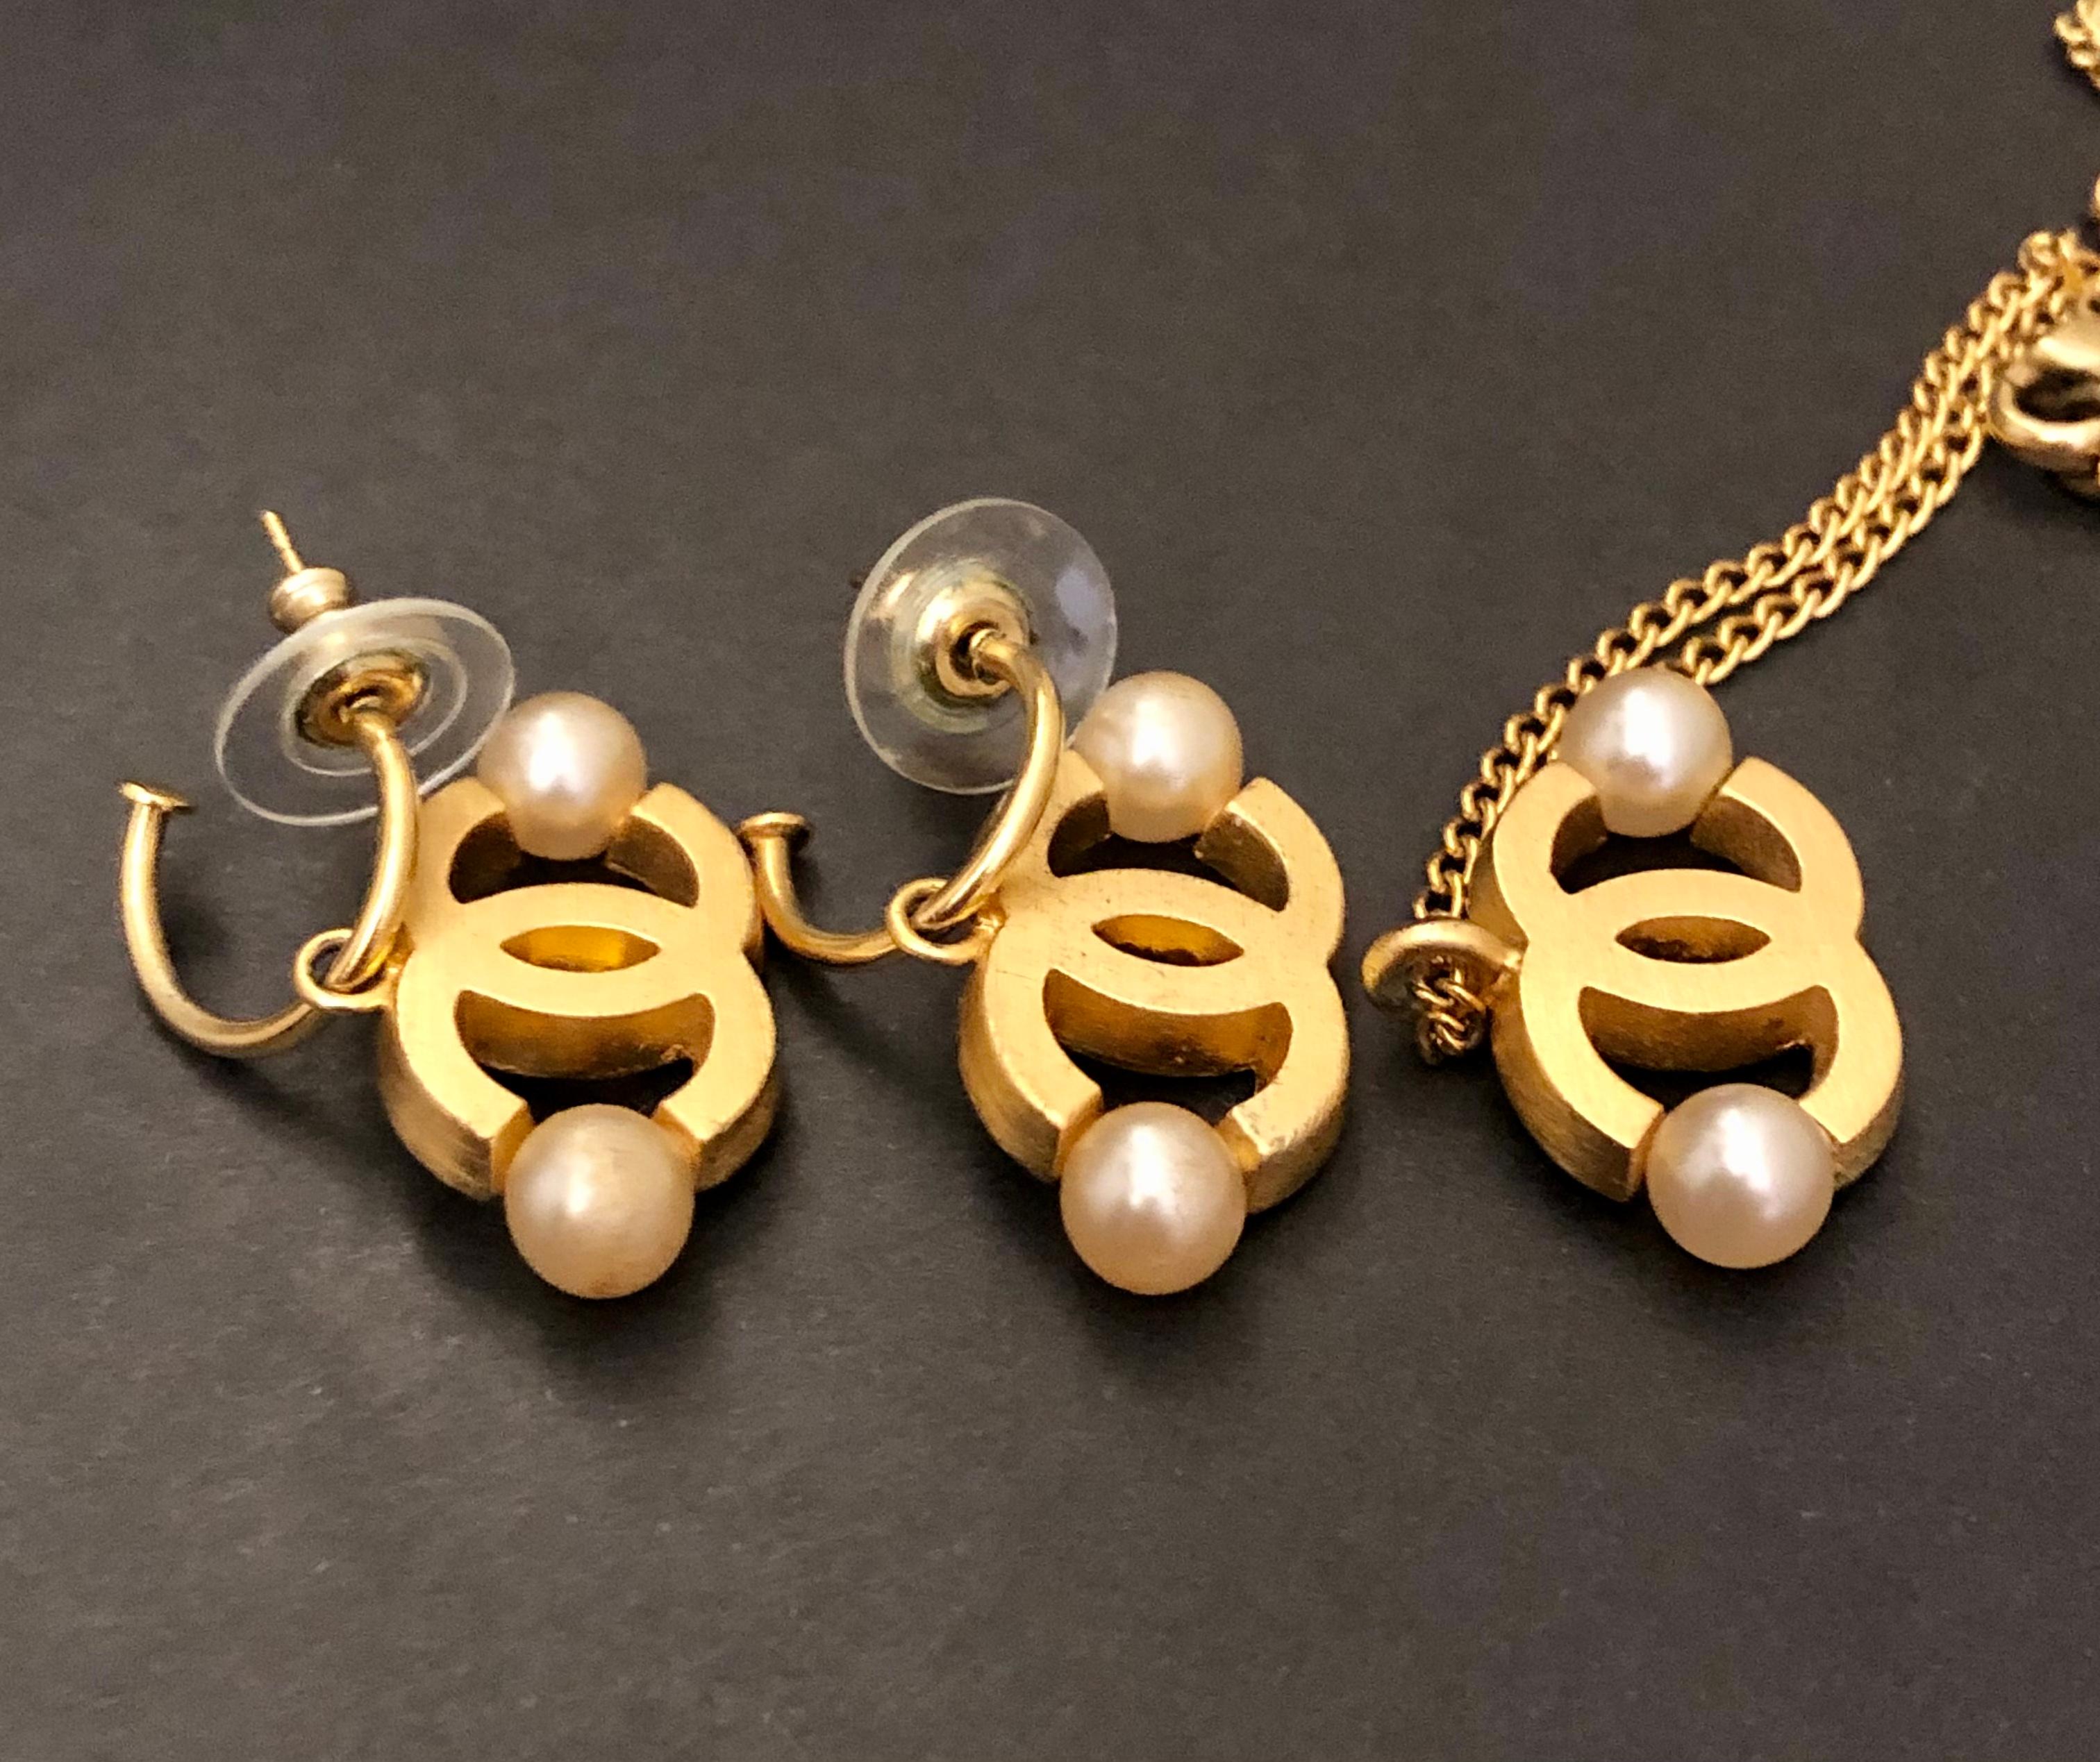 2002 Vintage CHANEL Faux Pearl Gold Toned CC Necklace Earrings Set 4